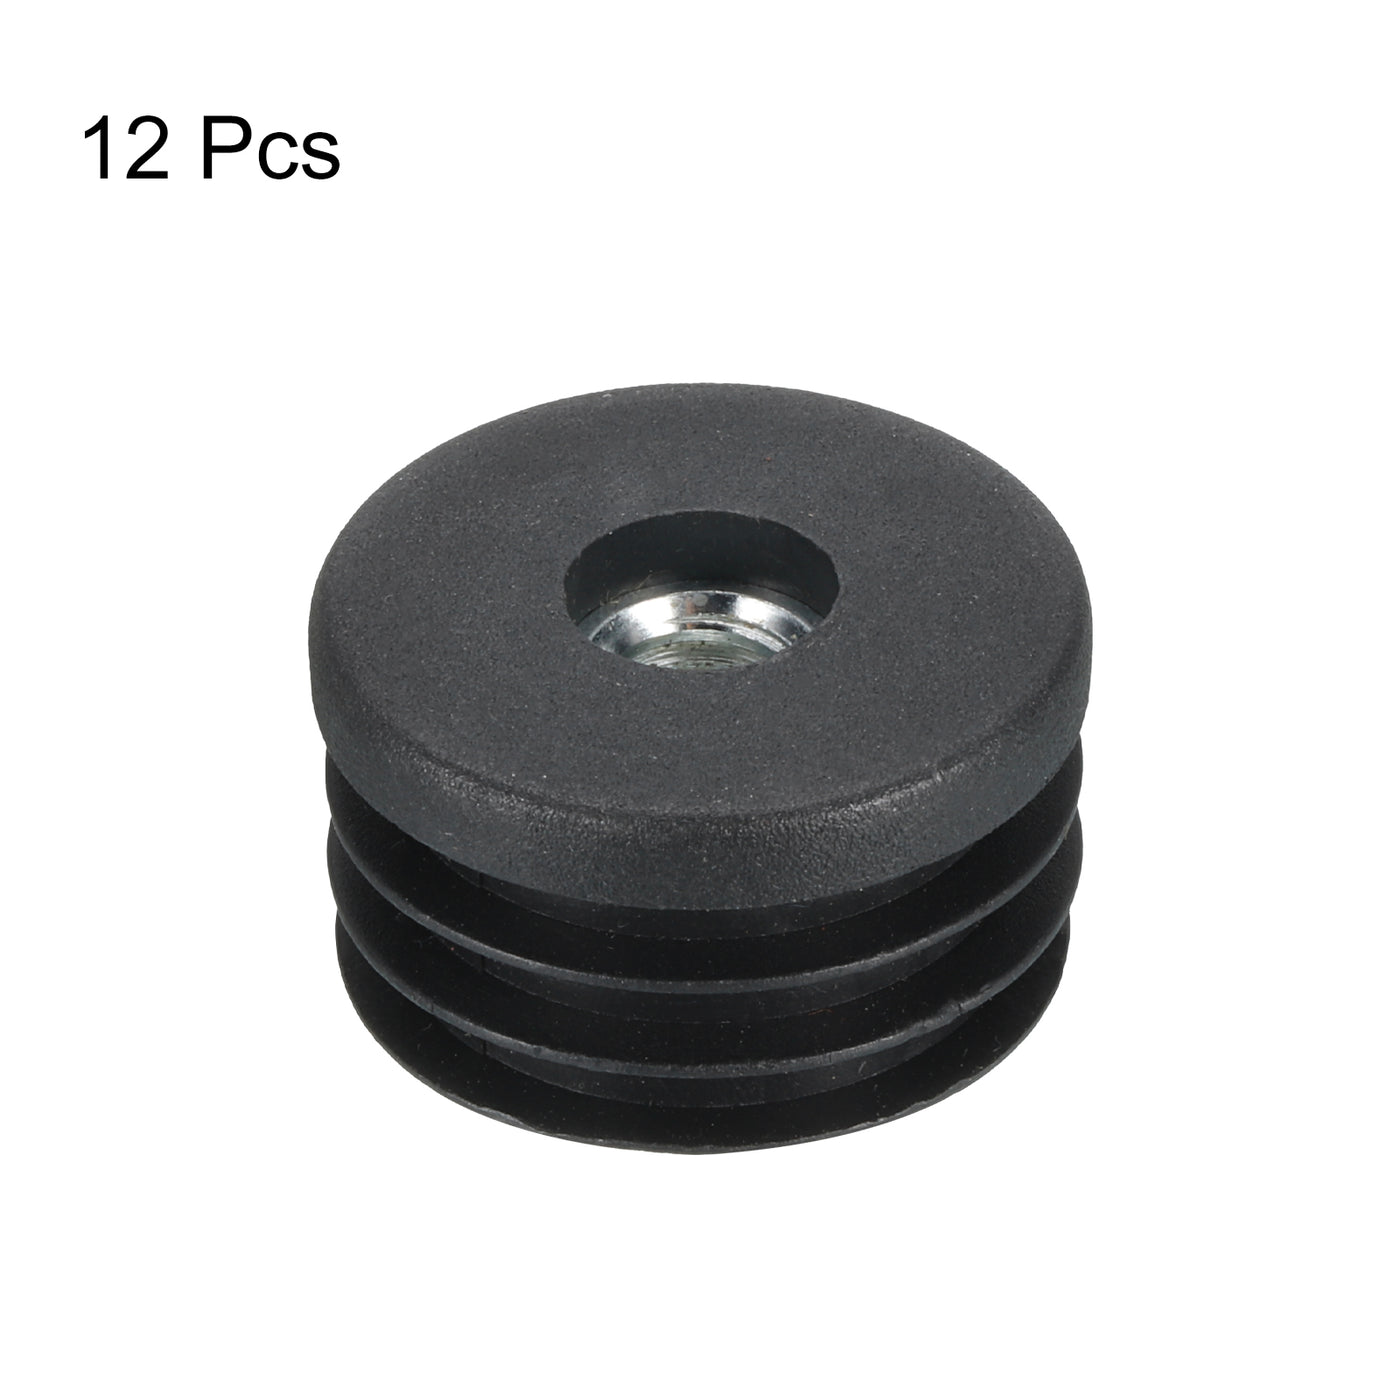 uxcell Uxcell 12Pcs Caster Insert with Thread, 30mm/1.18" M8 Thread for Furniture